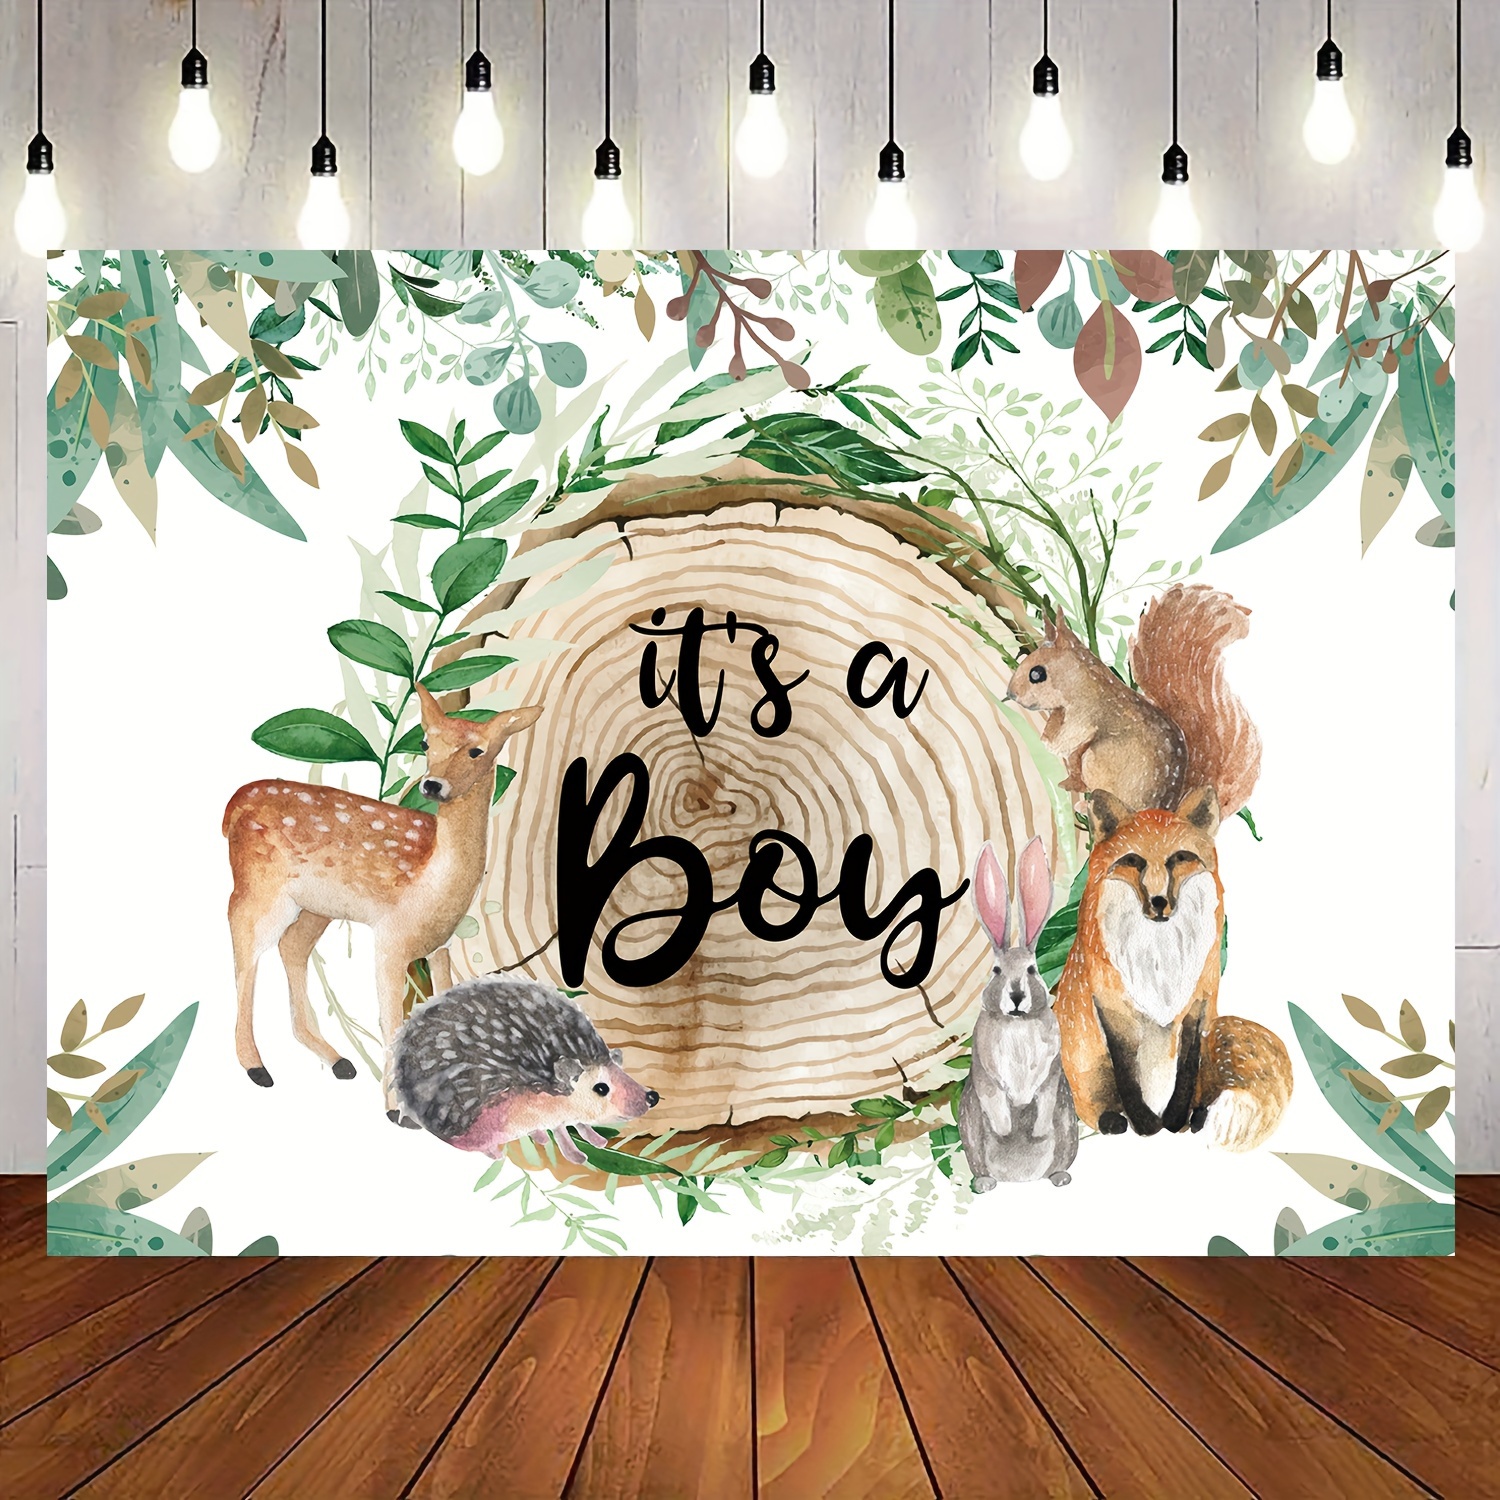 Woodland Baby Shower Woodland Fox Balloons Arch, Woodland Creatures Banner  Fawn Animal Friends Felt Garland Baby Shower Party Supplies Decorations  Woodland Gender Reveal 